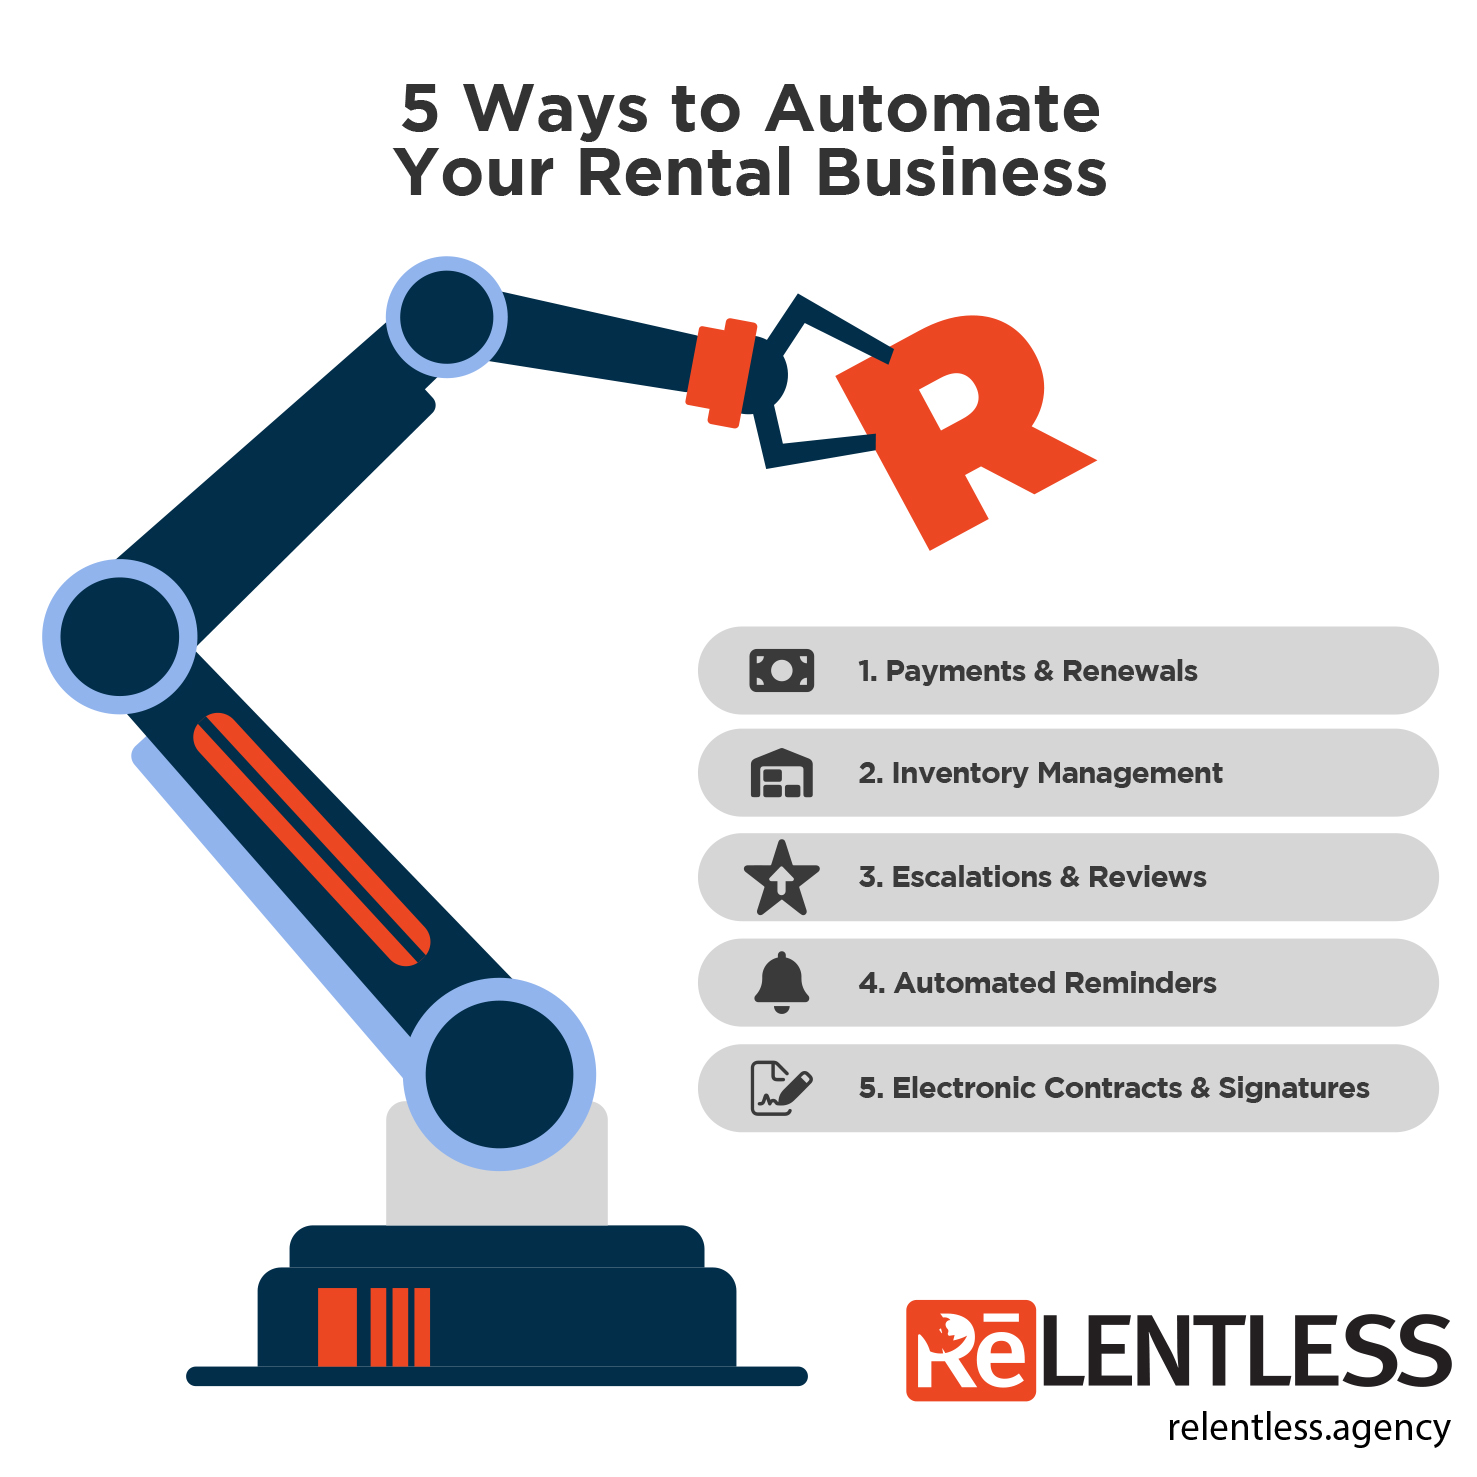 automate your rental business